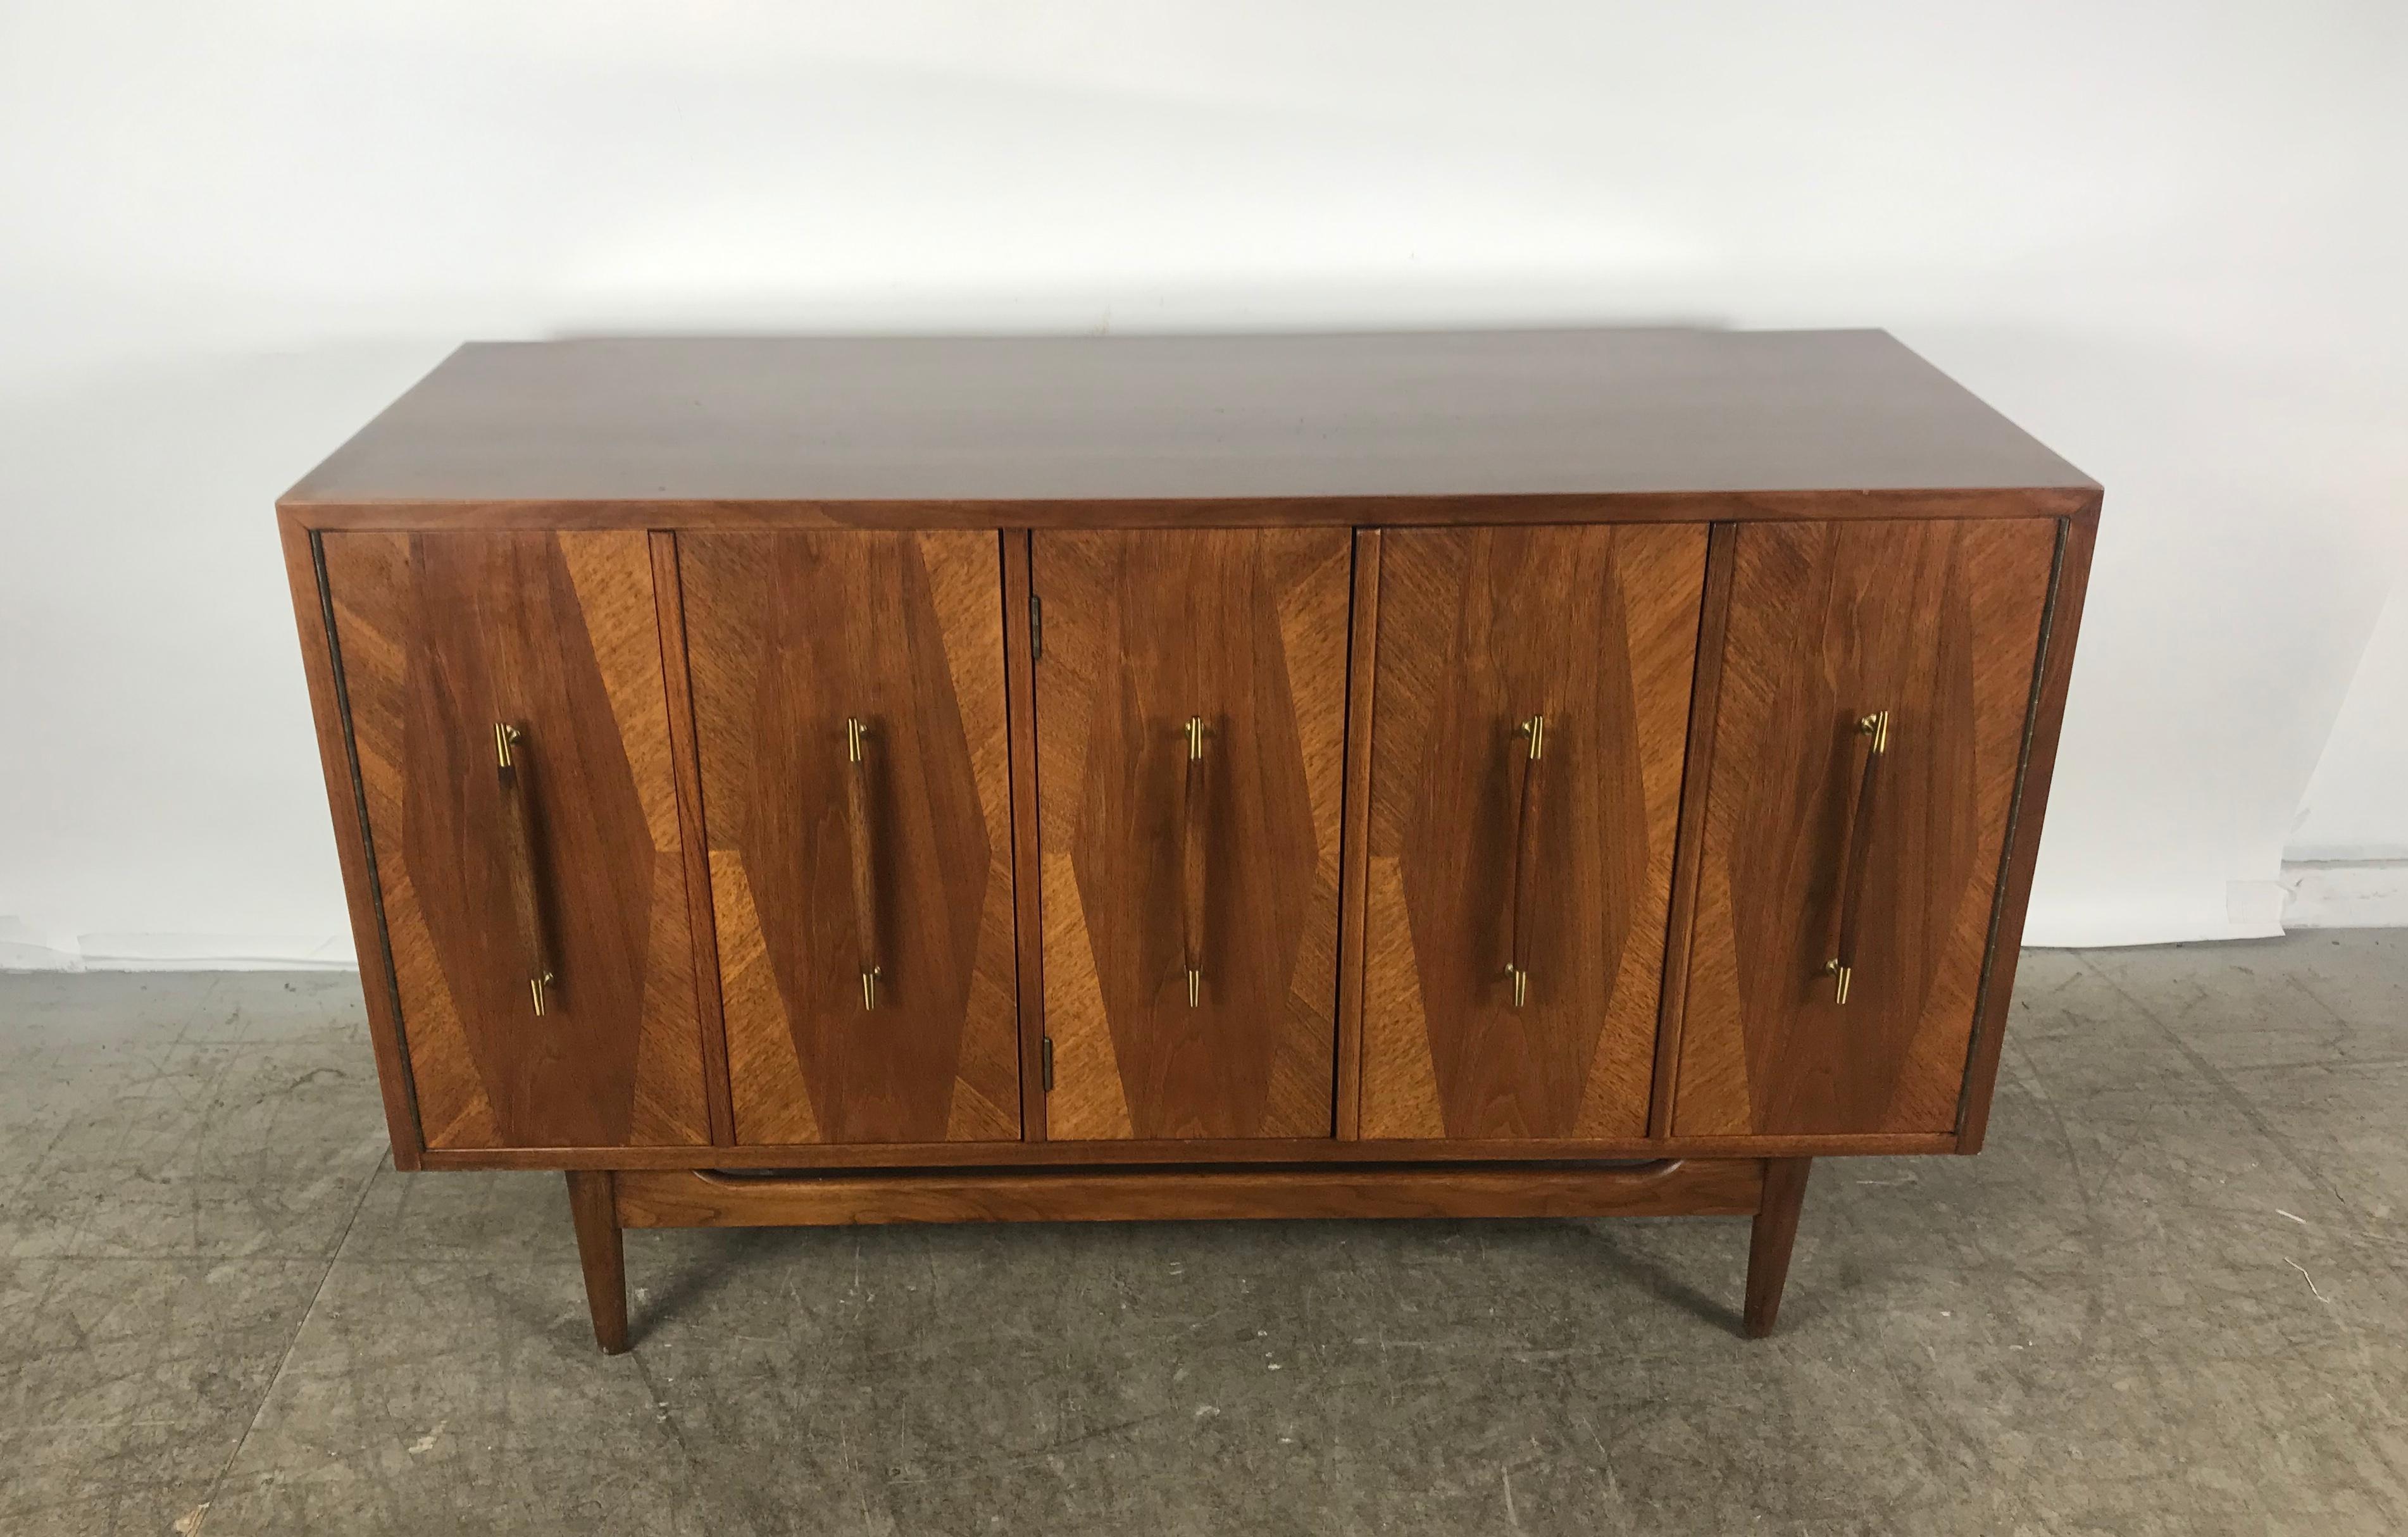 20th Century Modernist Walnut Cabinet or Server, Exotic Woods by American of Martinsville